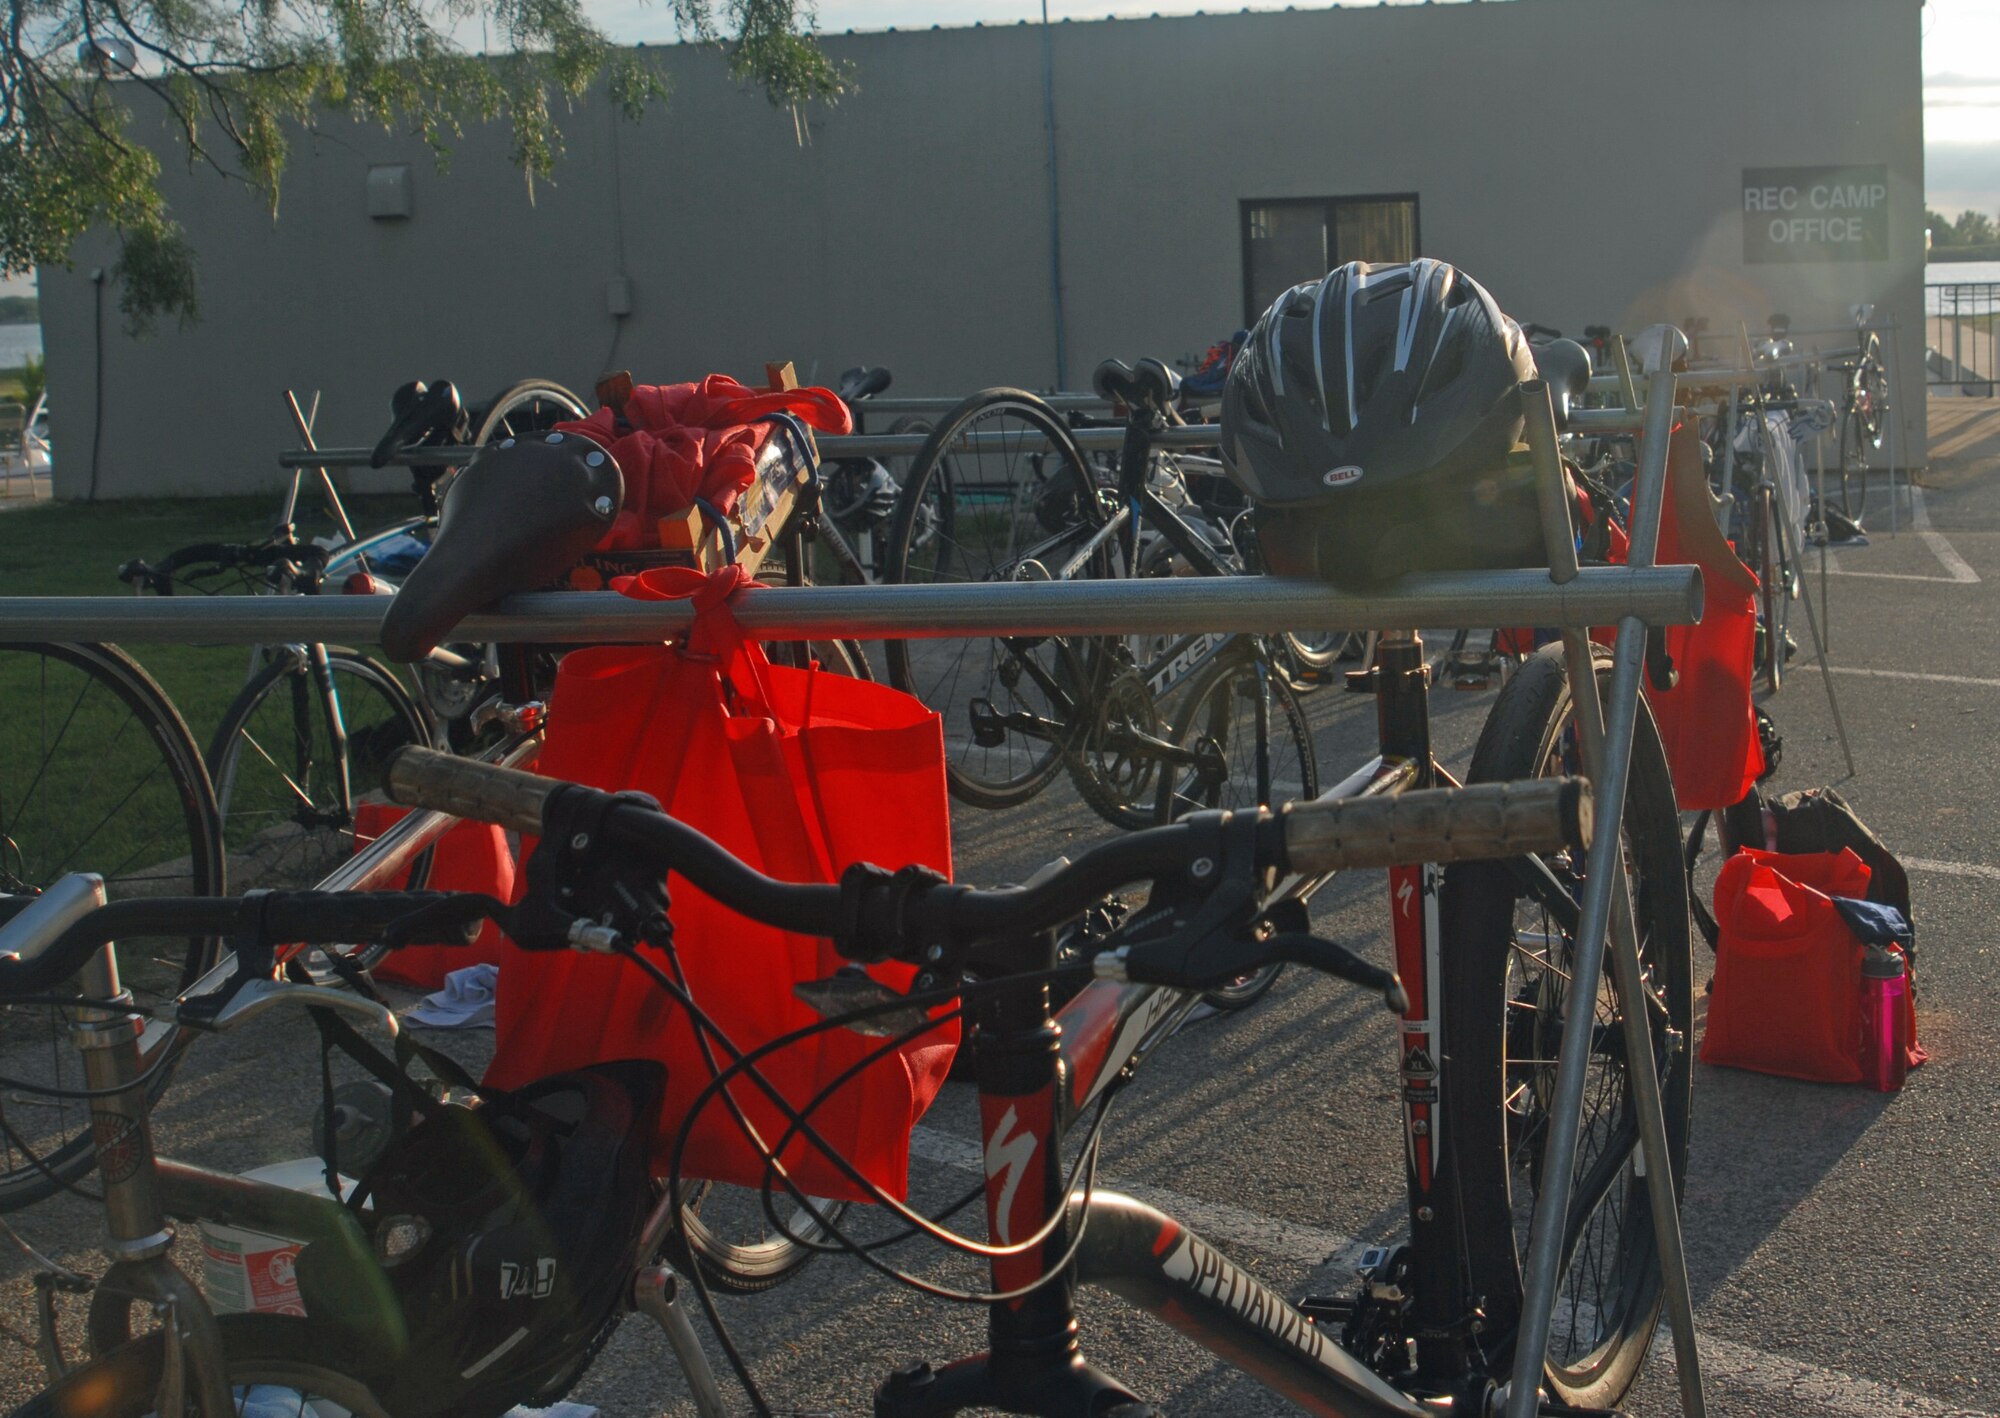 SAN ANGELO, Texas – Mountain and speed bicycles hang on bike racks for the 2013 Annual Triathlon at Goodfellow Recreation Camp July 27. The triathlon included a 400-meter swim, 20-kilometer bicycle ride and a 5-kilometer run. (U.S. Air Force photo/ Airman 1st Class Breonna Veal)